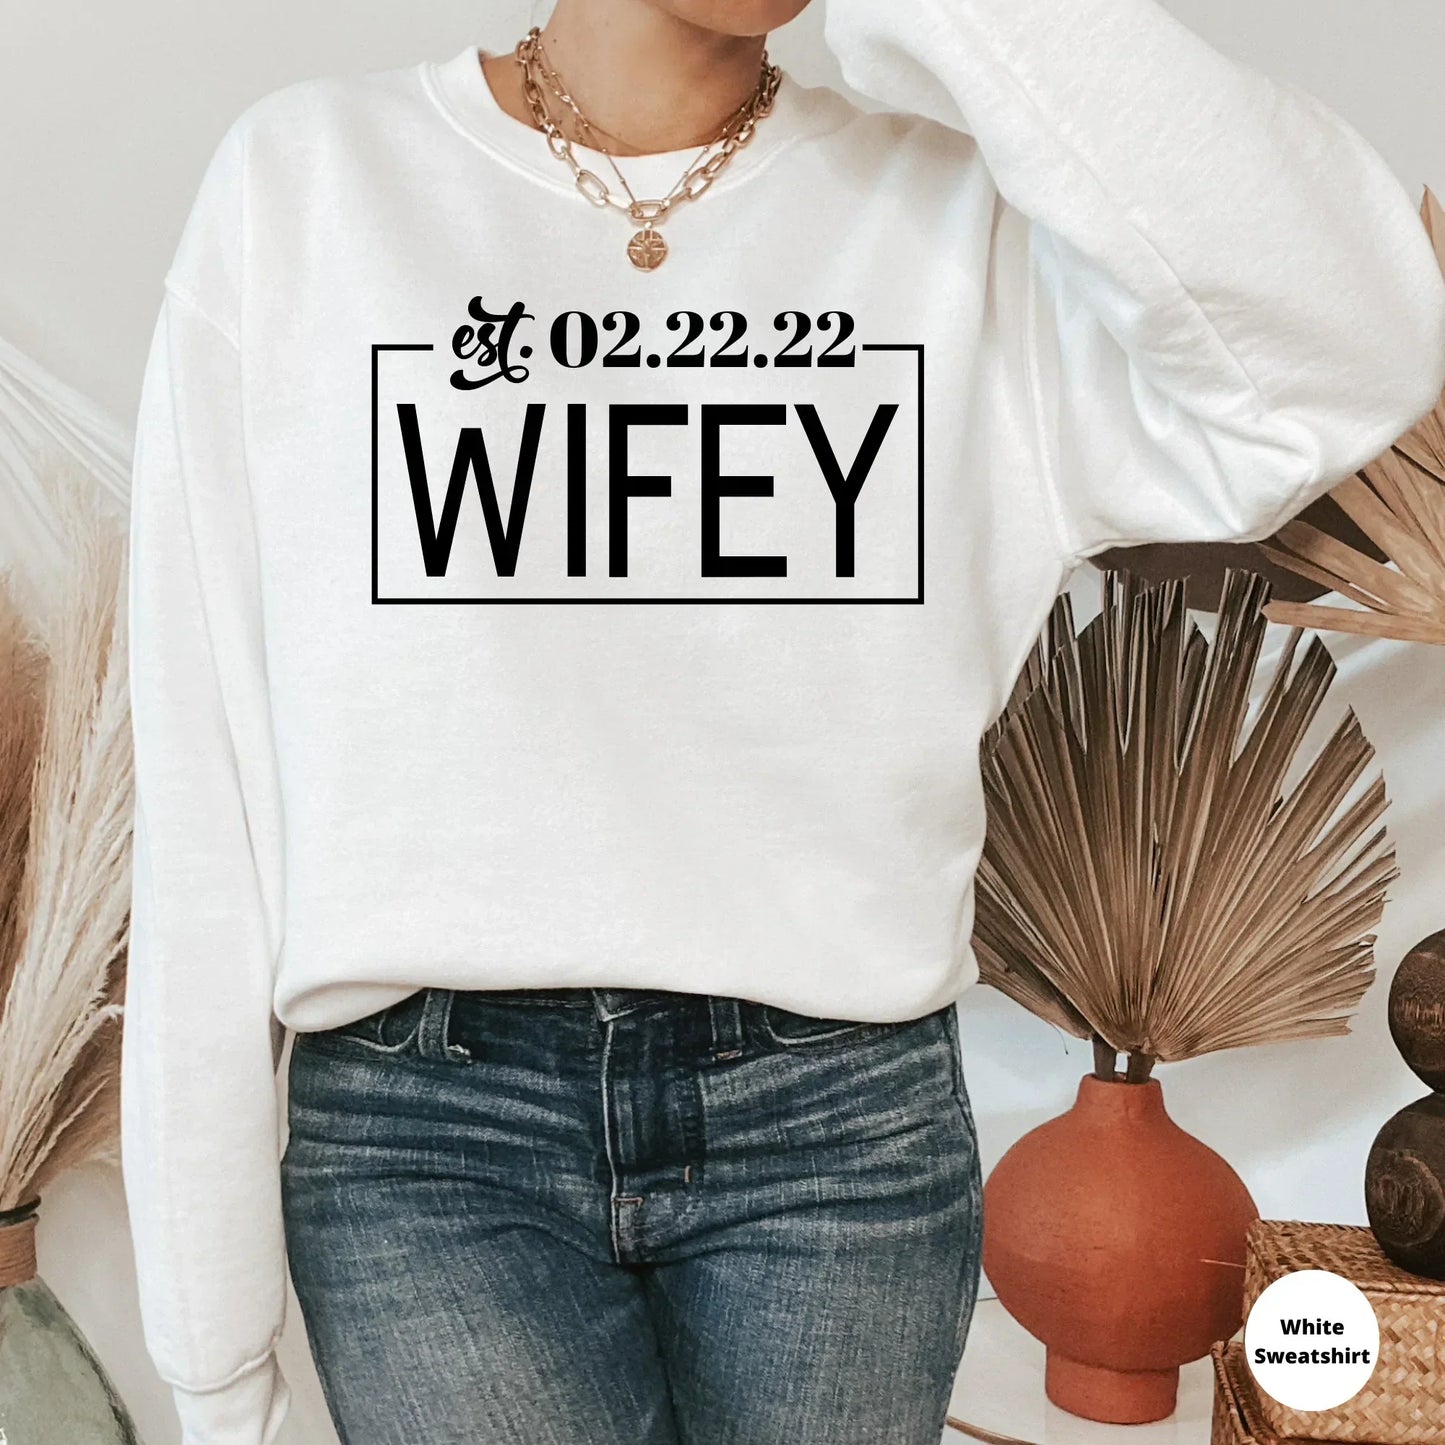 Mr and Mrs Shirts, Just Married Shirts, Mrs Sweatshirt, Wife Shirt, Wifey Sweatshirt, Future Mrs Shirt, Hubby Wifey Shirts, Wifey Hoodie